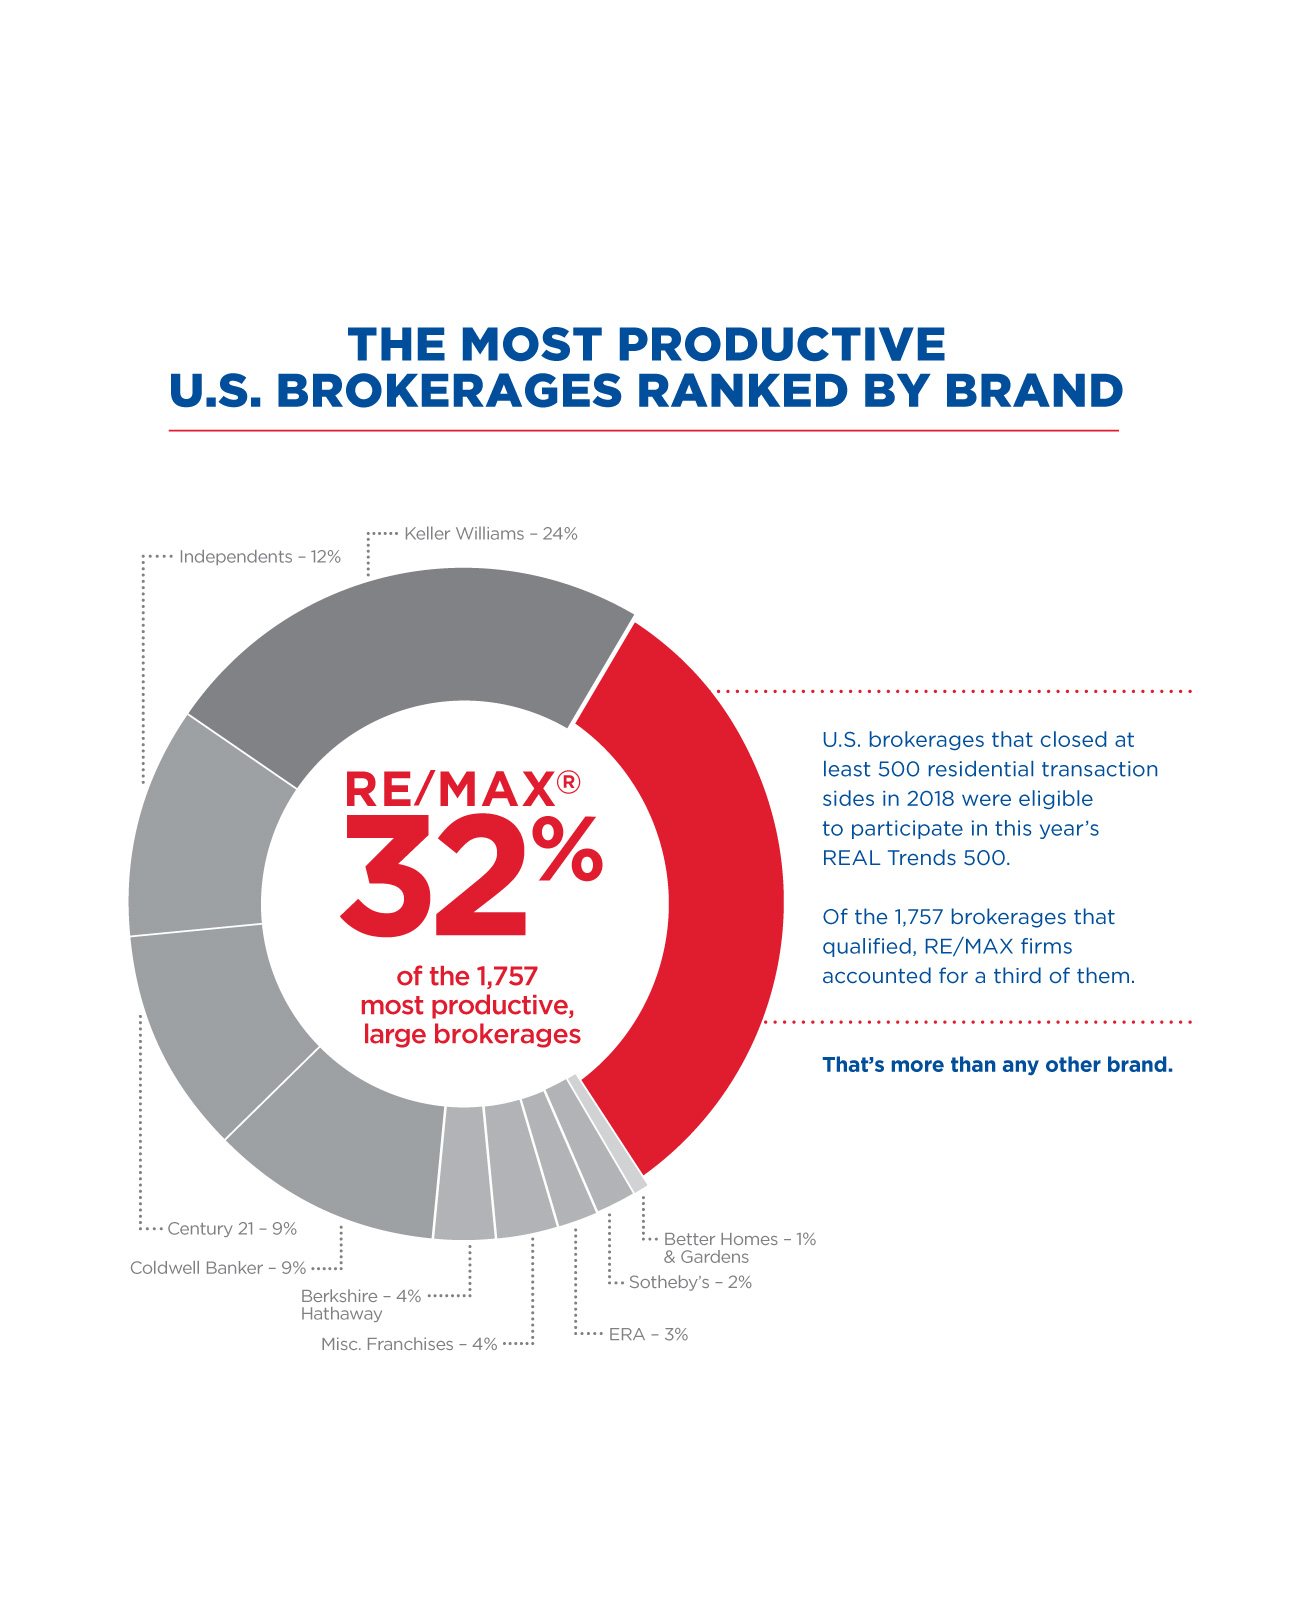 The Most Productive U.S Brokerages Ranked By Brand